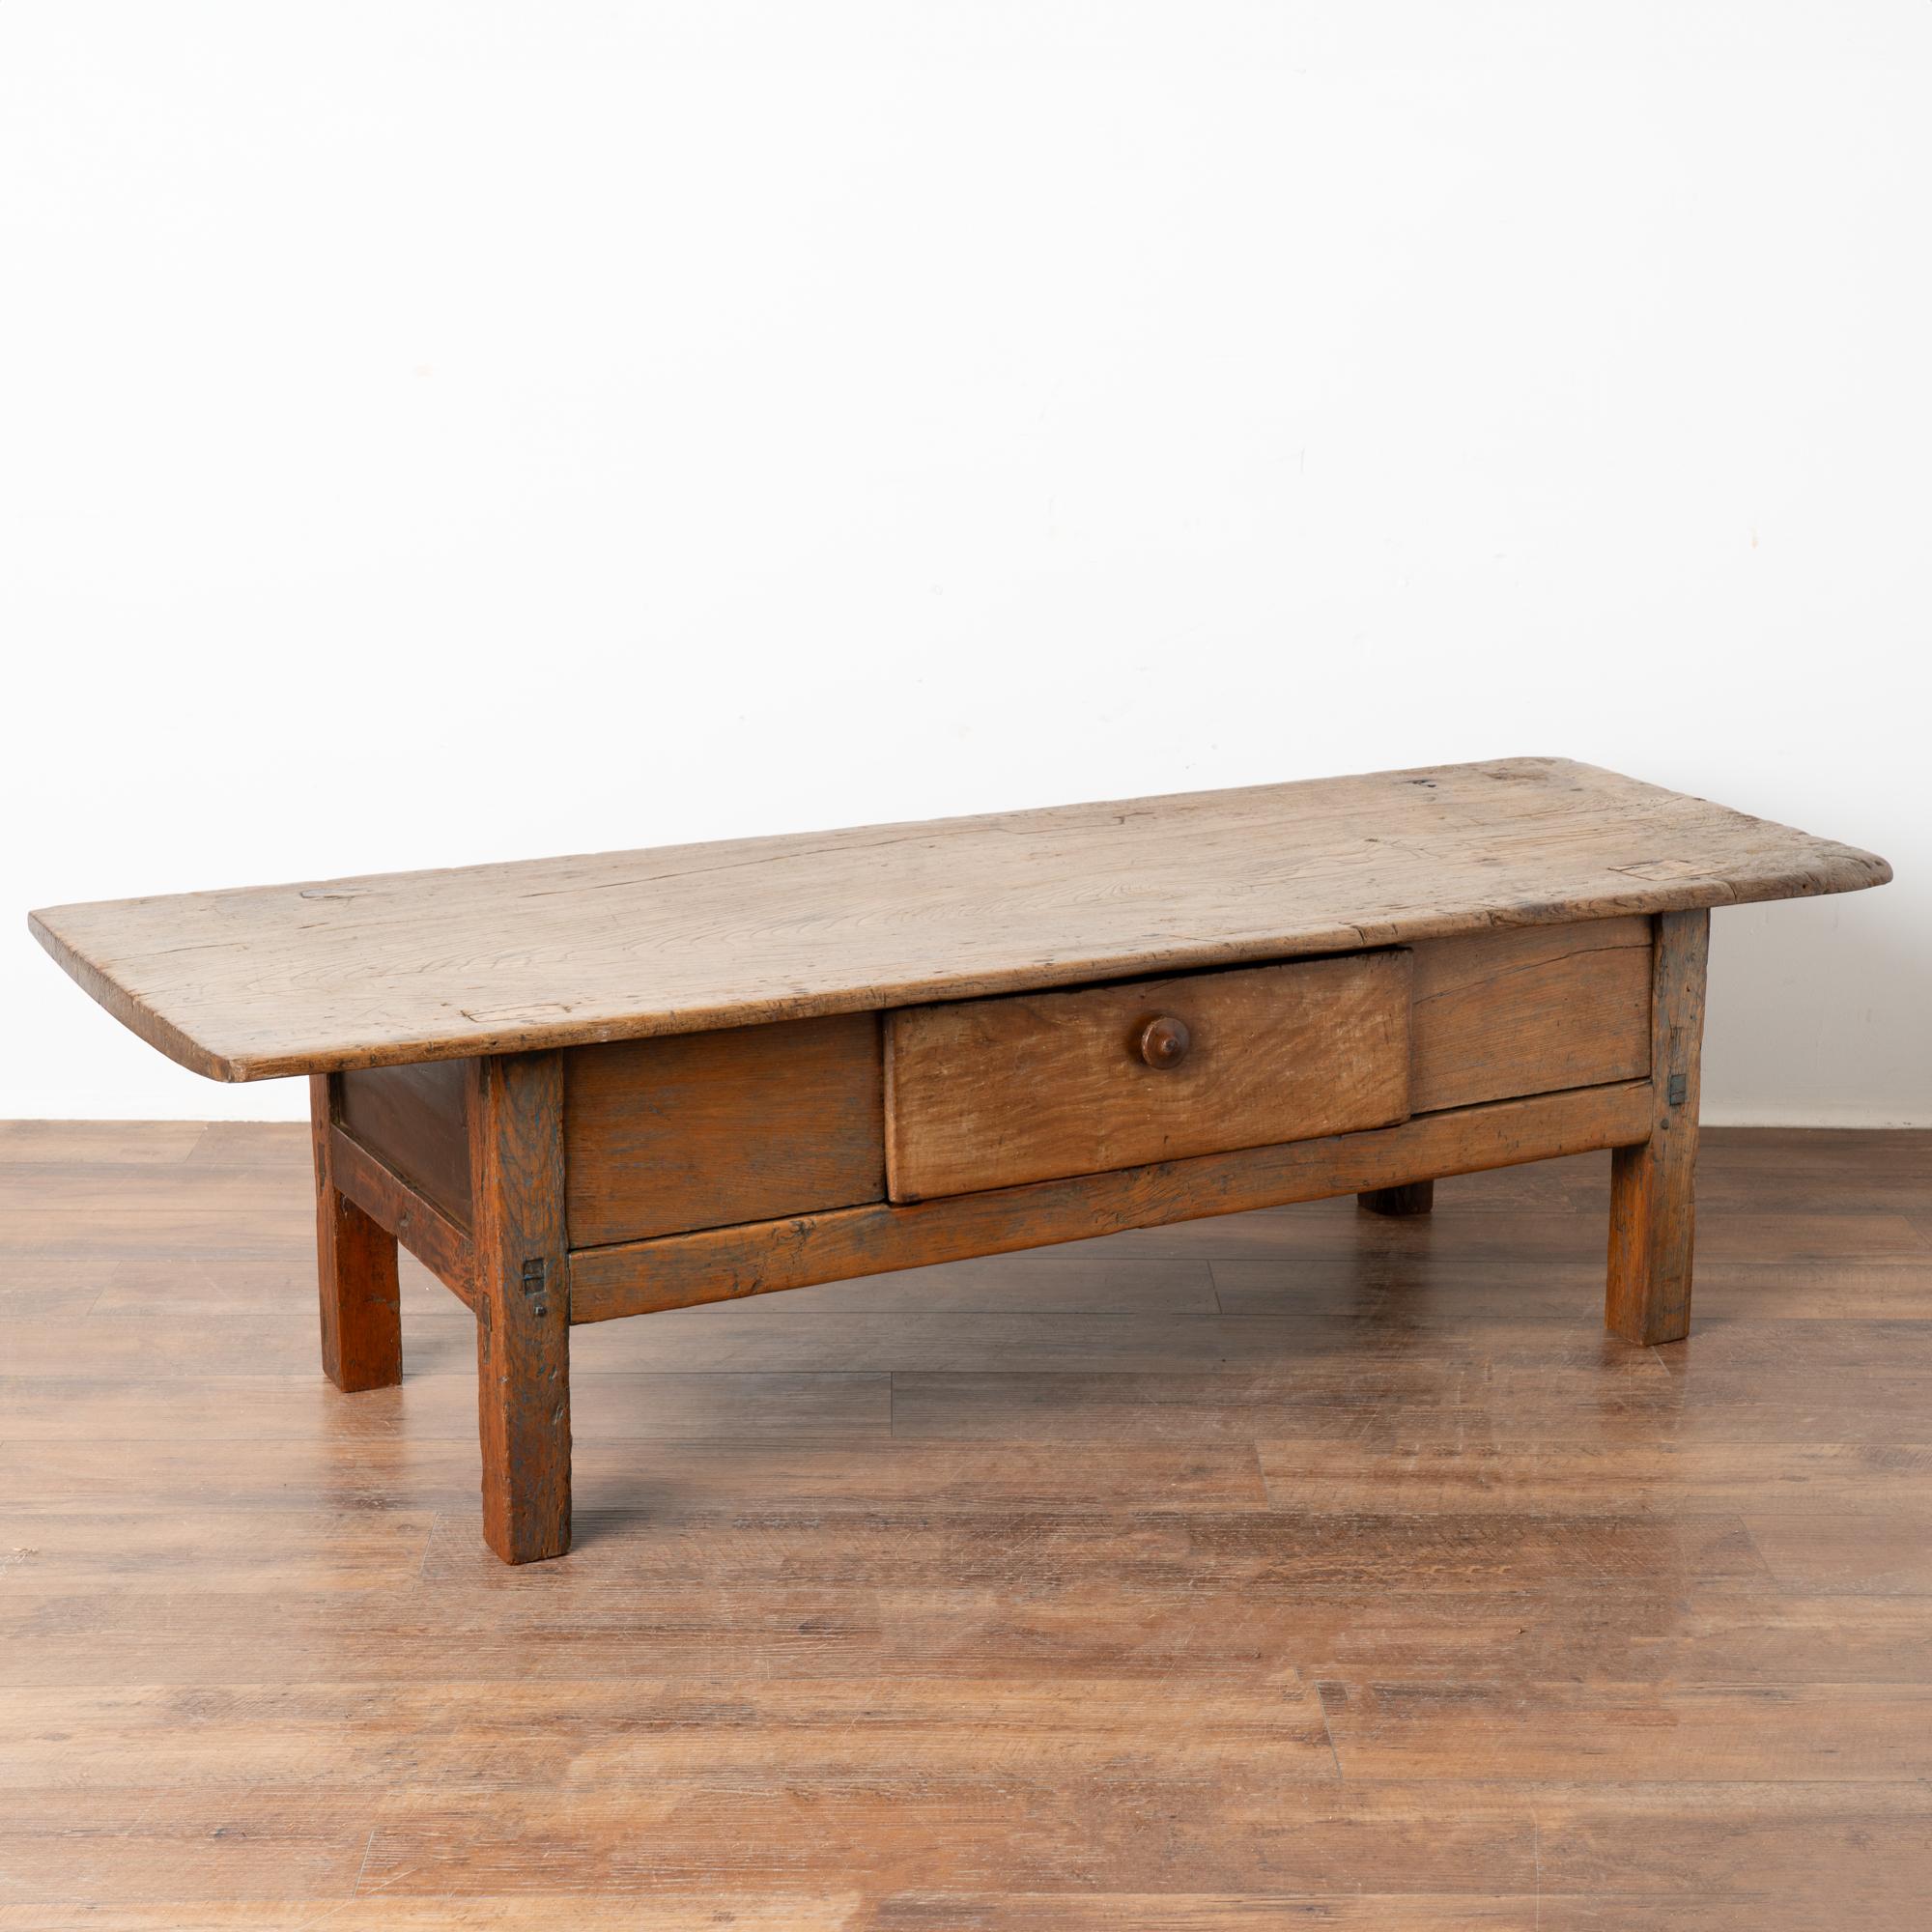 The beauty of this French country coffee table with one large drawer comes from the warm aged patina of the wood. Every crack, ding, old knot and stain all add to the depth and richness found in the worn top. There is faint residual blue paint that